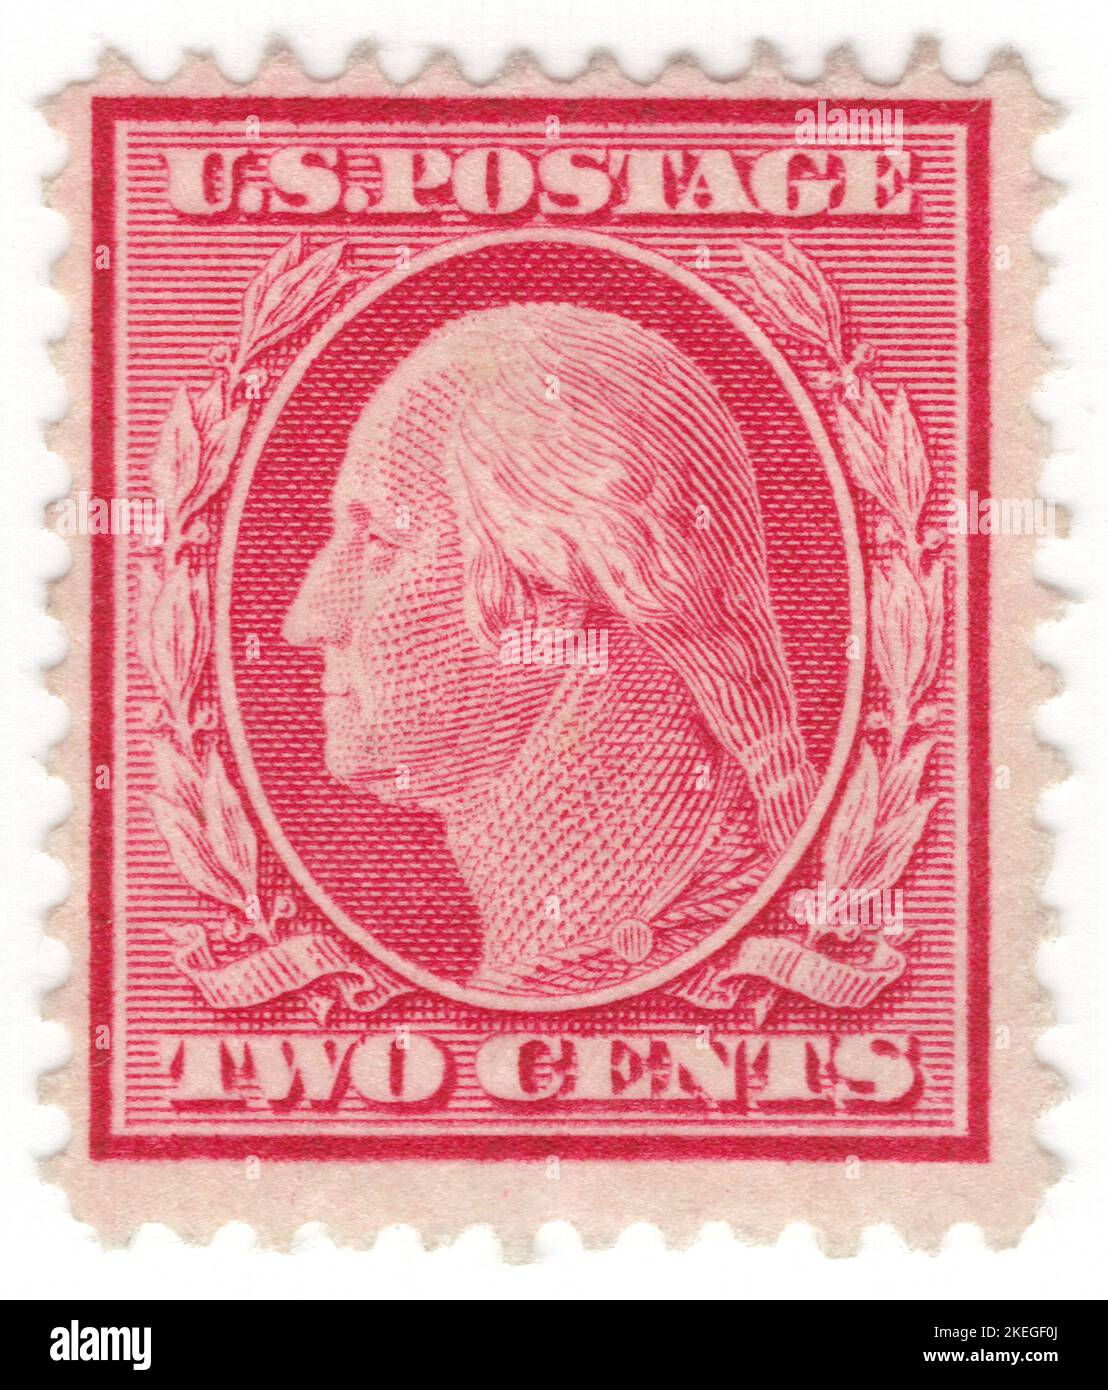 USA - 1908: An 2 cents carmine postage stamp depicting portrait of George Washington. American military officer, statesman, and Founding Father who served as the first president of the United States from 1789 to 1797. Appointed by the Continental Congress as commander of the Continental Army, Washington led the Patriot forces to victory in the American Revolutionary War and served as the president of the Constitutional Convention of 1787, which created the Constitution of the United States and the American federal government. Washington has been called the 'Father of his Country' Stock Photo